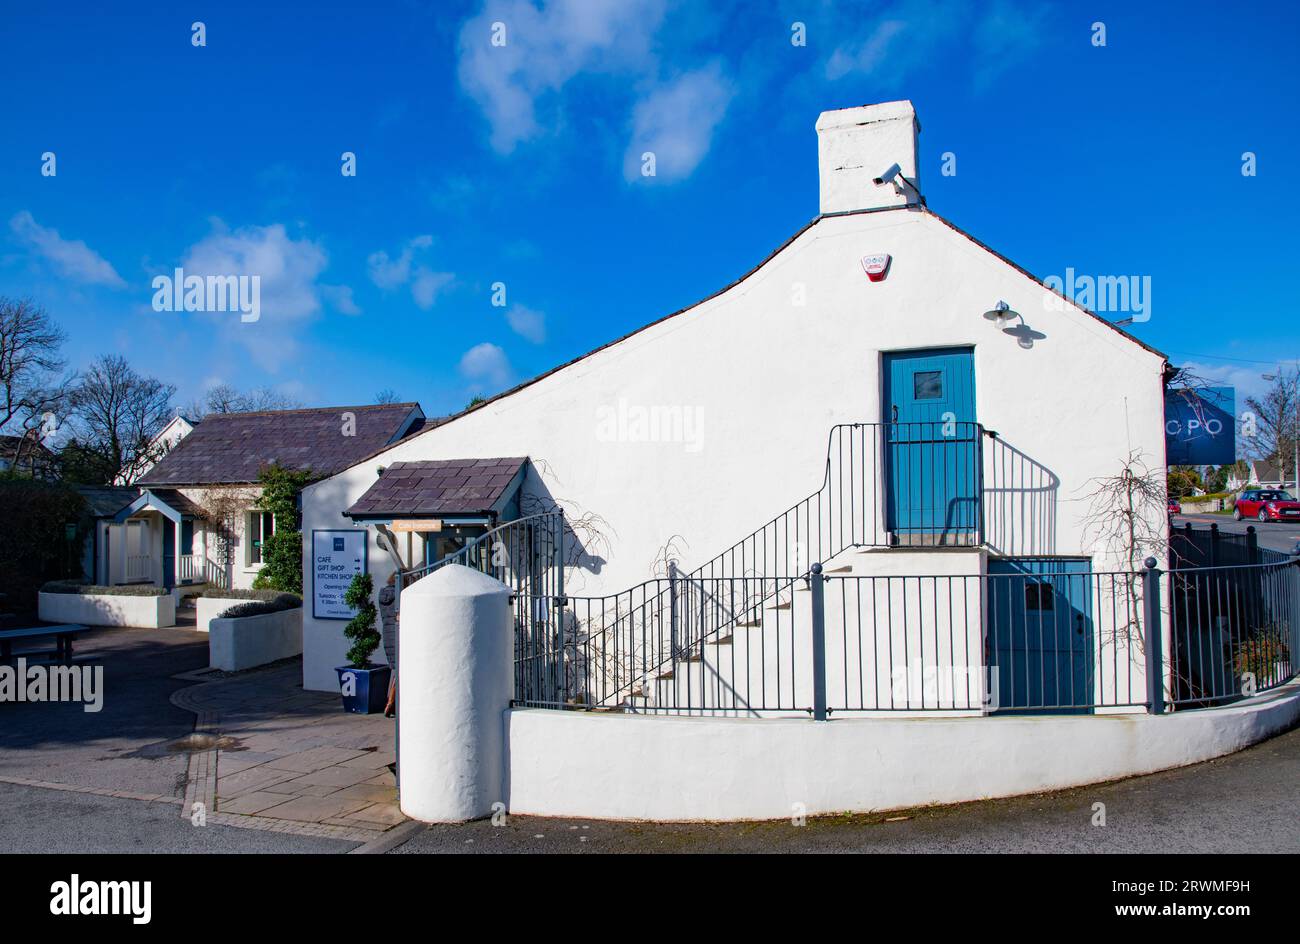 Post Office Cafe, Lisbane, County Down, Comber, Northern Ireland Stock Photo